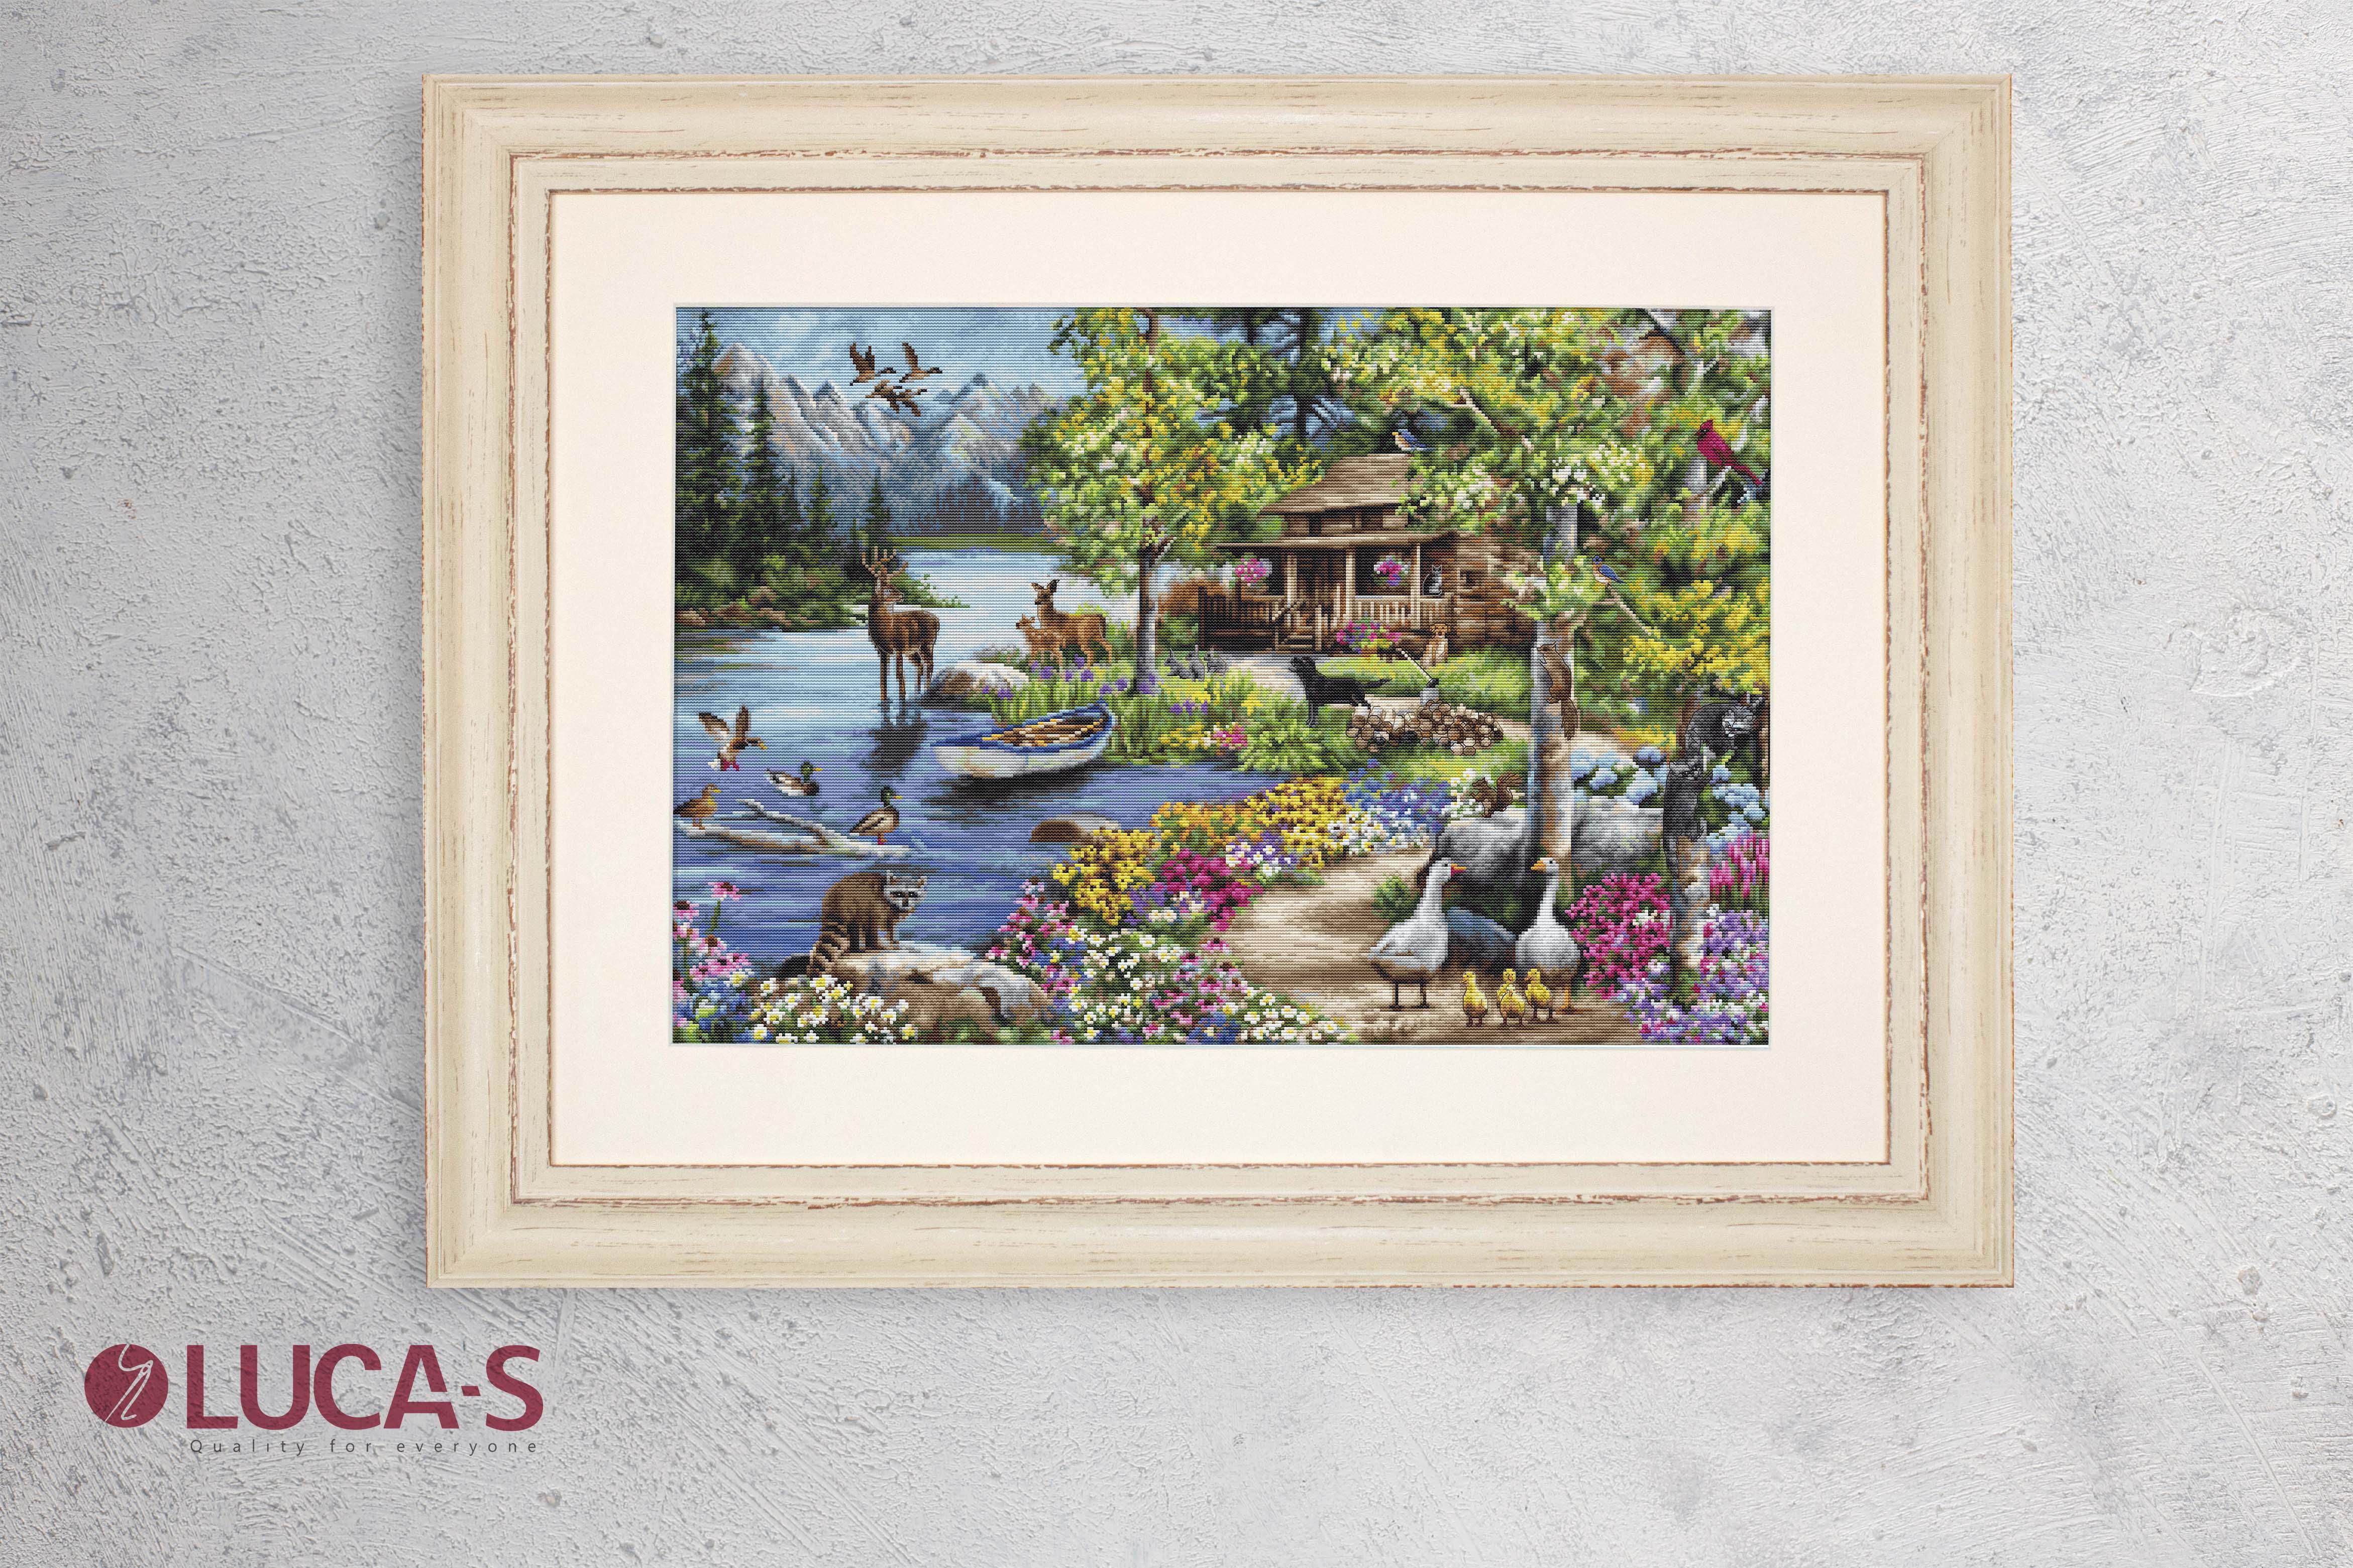 Cross Stitch Kit Luca-S GOLD - Cabin By The Lake, B2410 - Luca-S Cross Stitch Kits